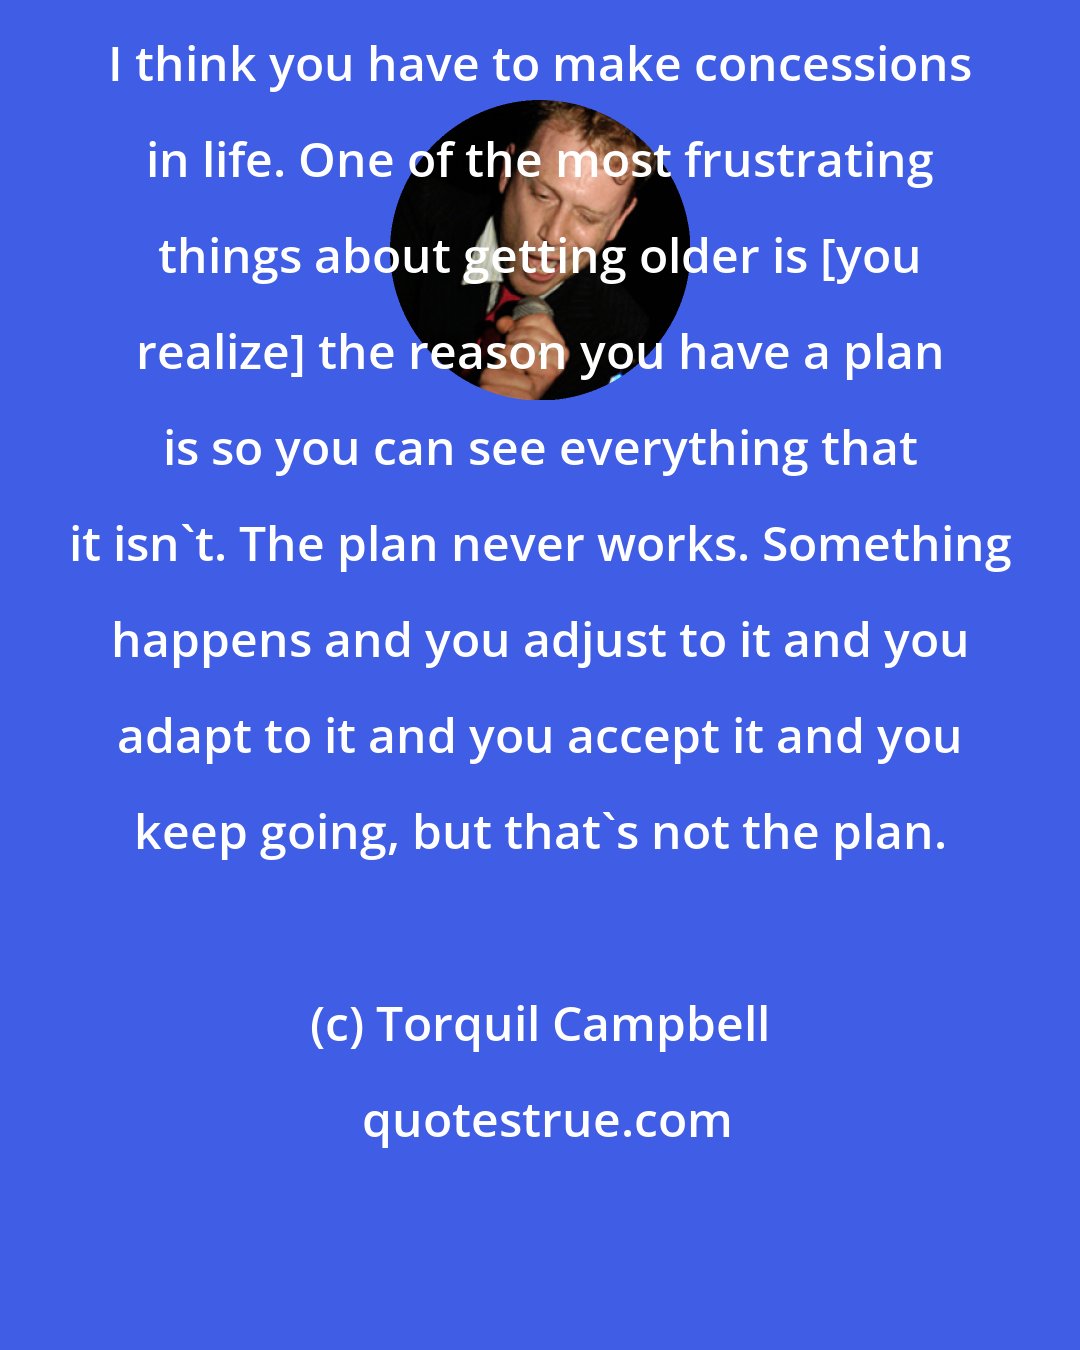 Torquil Campbell: I think you have to make concessions in life. One of the most frustrating things about getting older is [you realize] the reason you have a plan is so you can see everything that it isn't. The plan never works. Something happens and you adjust to it and you adapt to it and you accept it and you keep going, but that's not the plan.